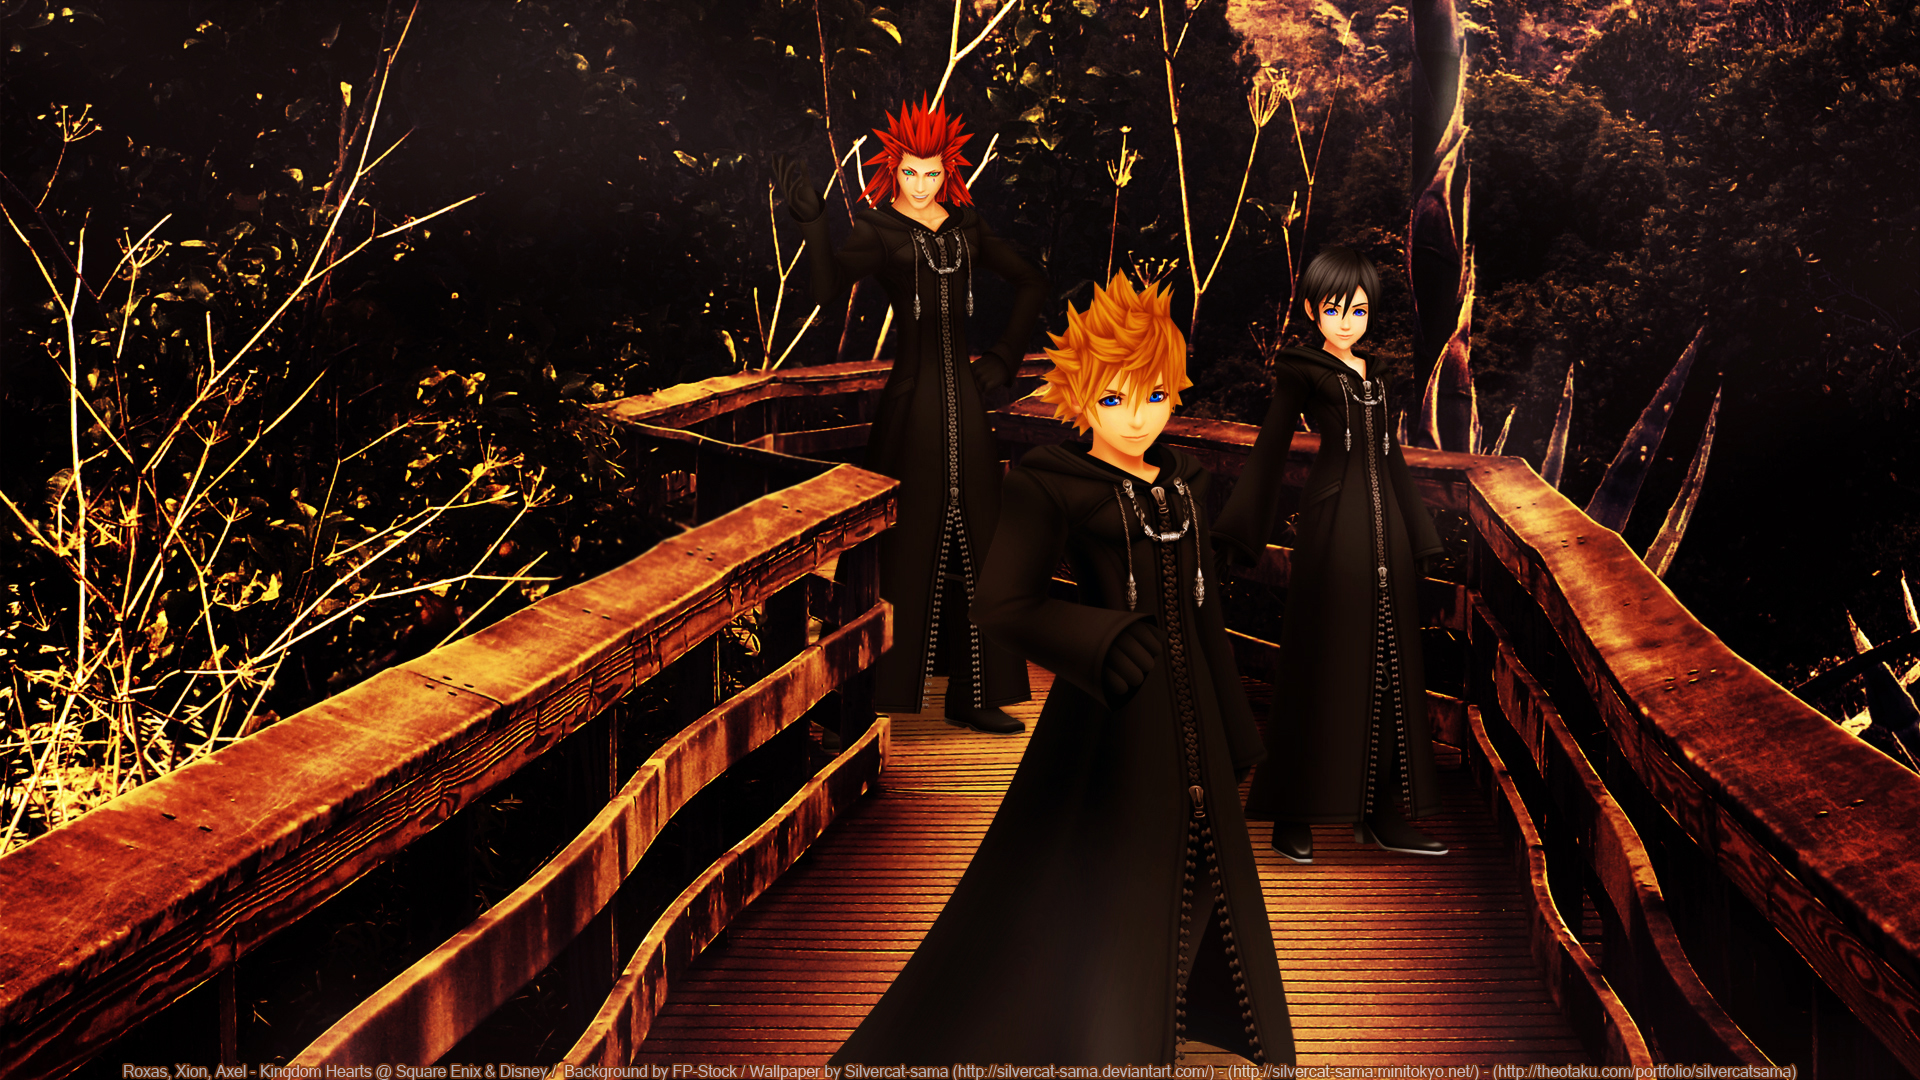 Axel Wallpapers